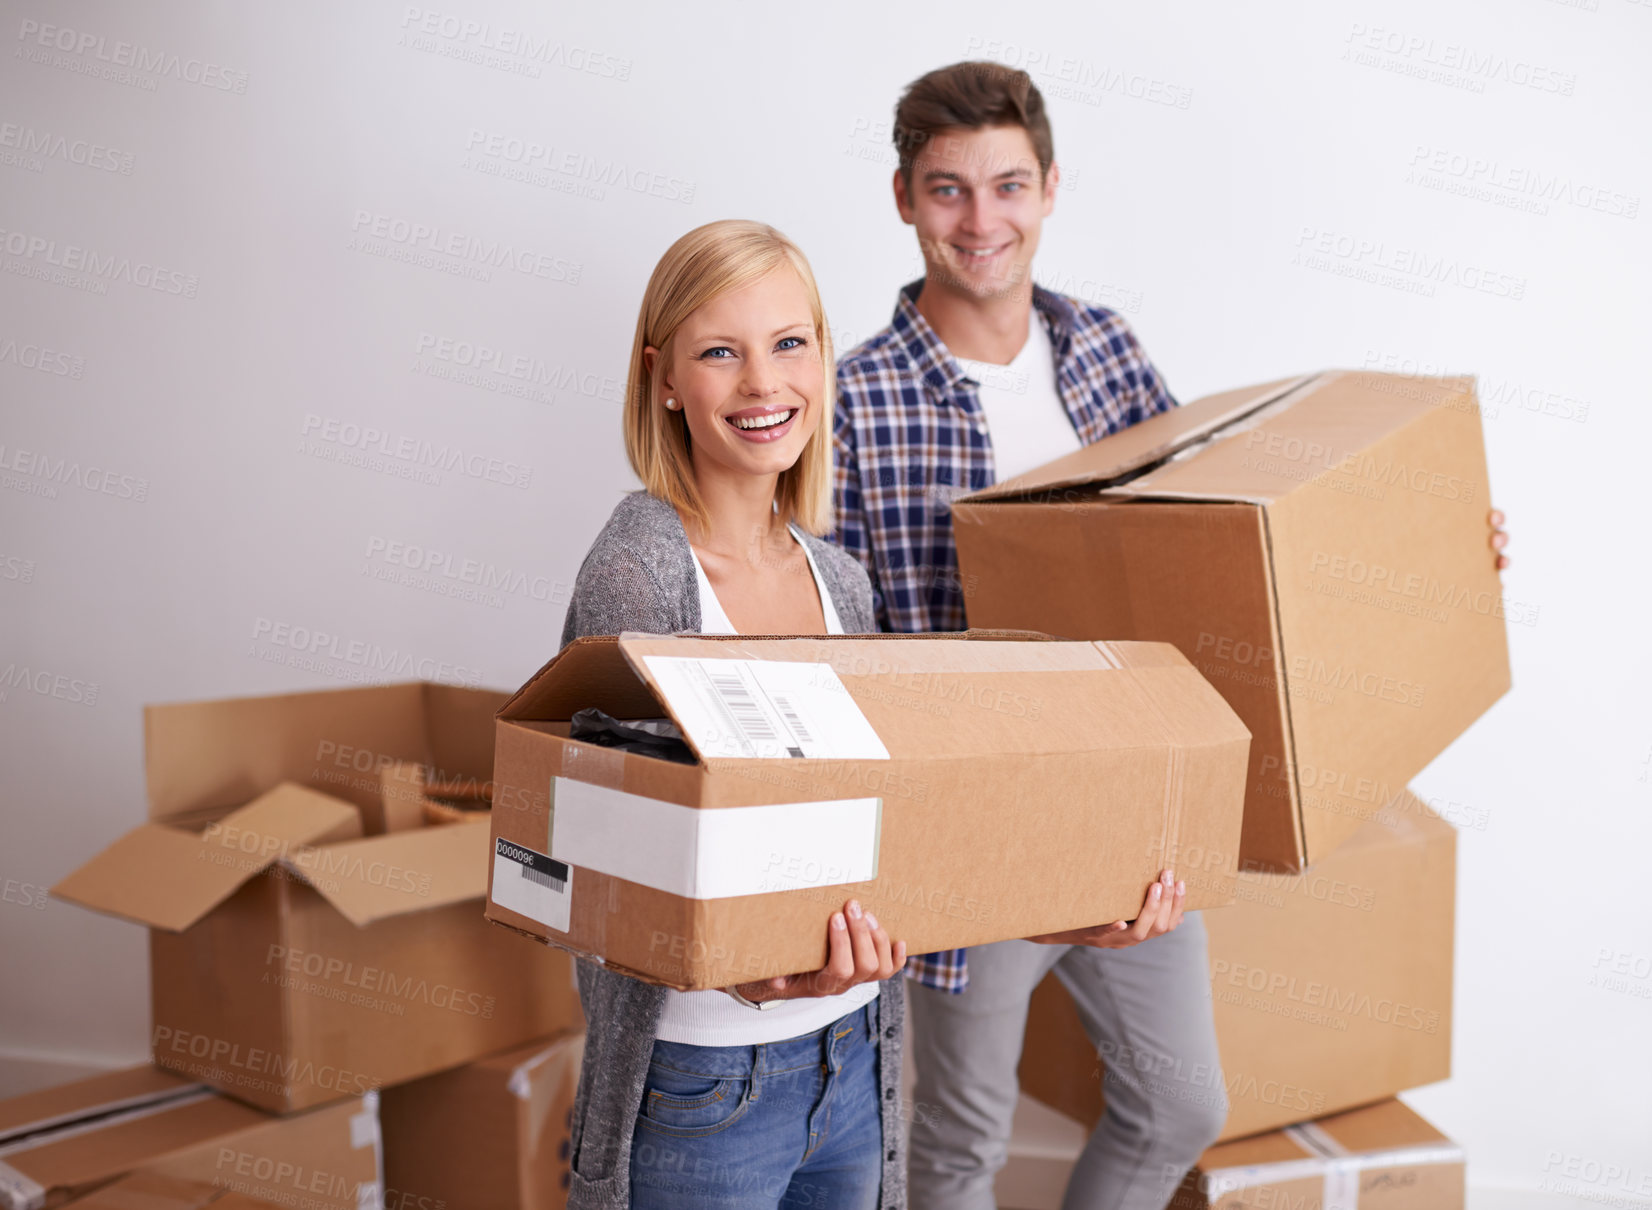 Buy stock photo Shot of a happy young couple on their moving in day